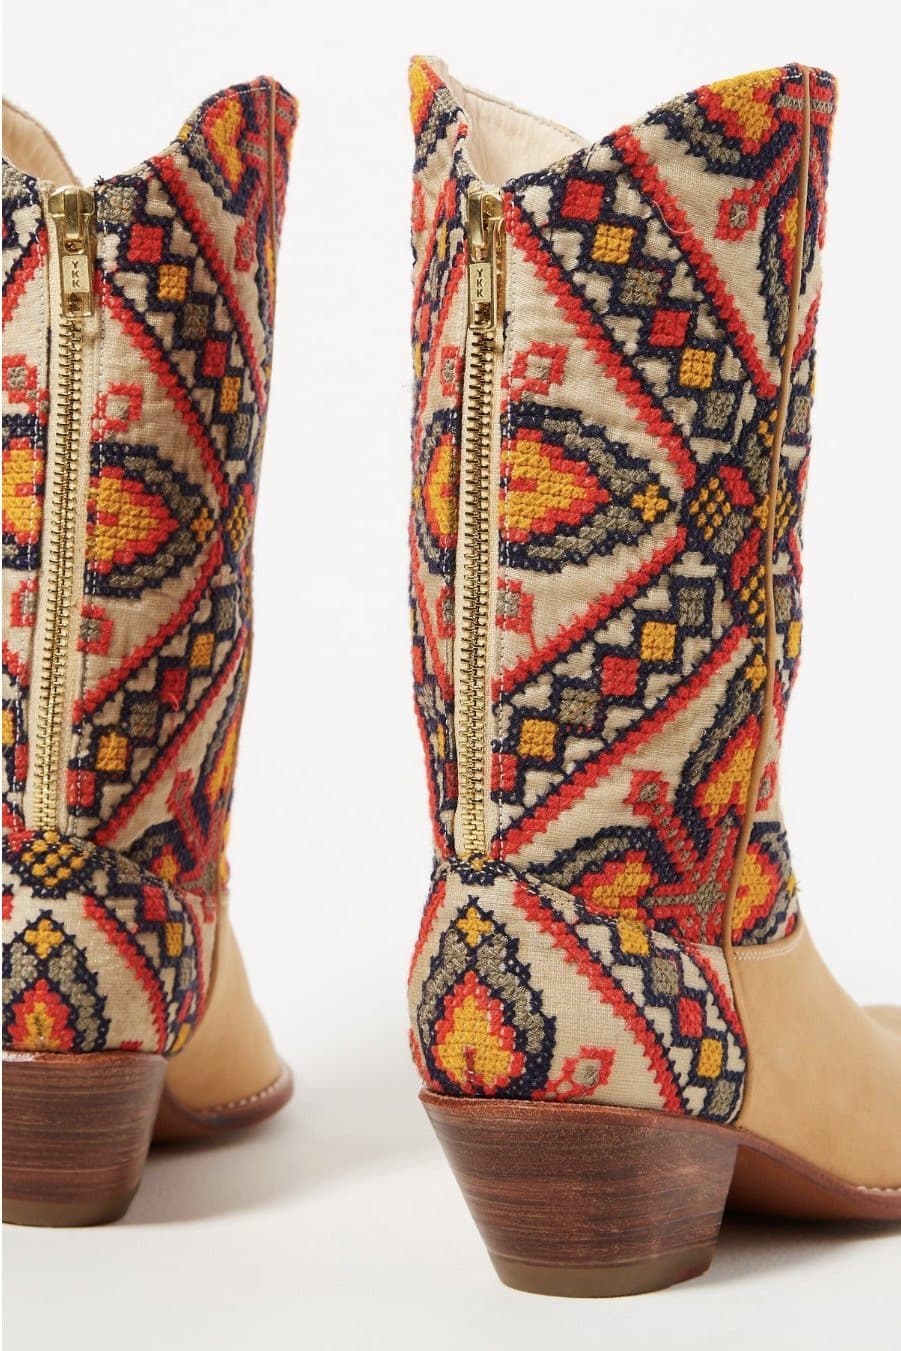 NEEDLESTITCH EMBROIDERED WESTERN BOOTS X ANTHROPOLOGIE - BANGKOK TAILOR CLOTHING STORE - HANDMADE CLOTHING